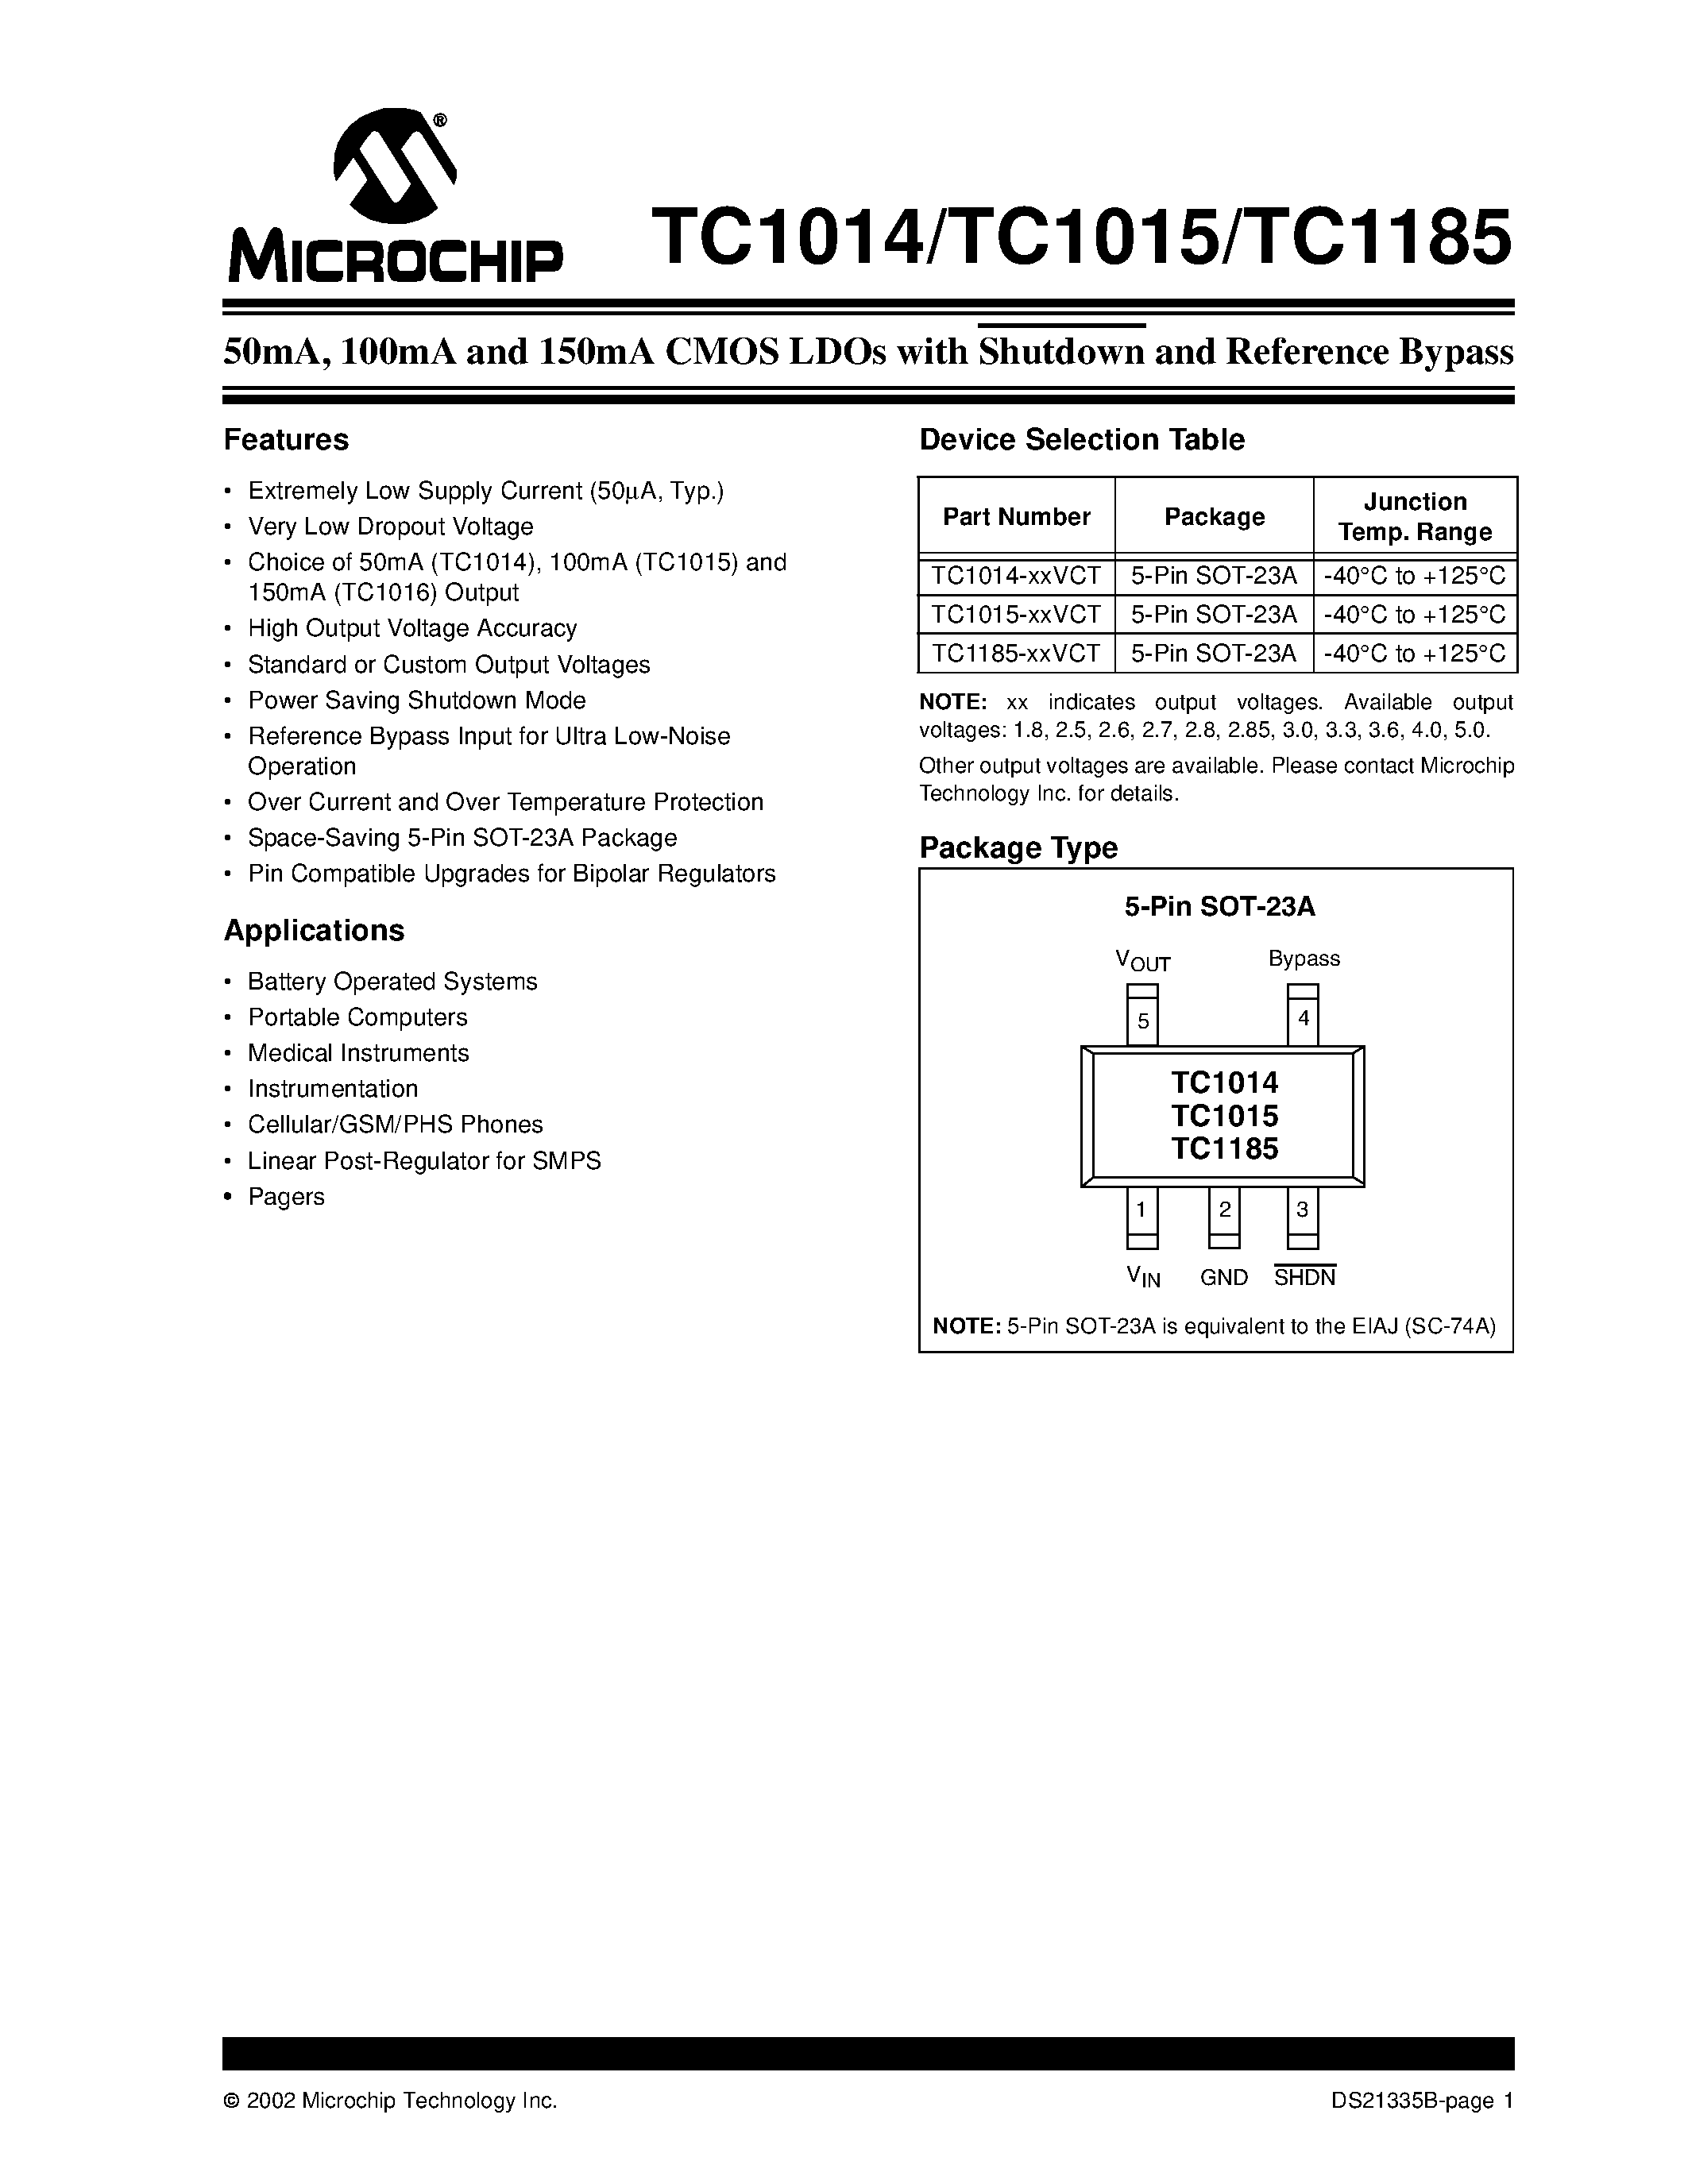 Datasheet TC1014 - (TC1014 / TC1015 / TC1185) CMOS LDOs with Shutdown and Reference Bypass page 1